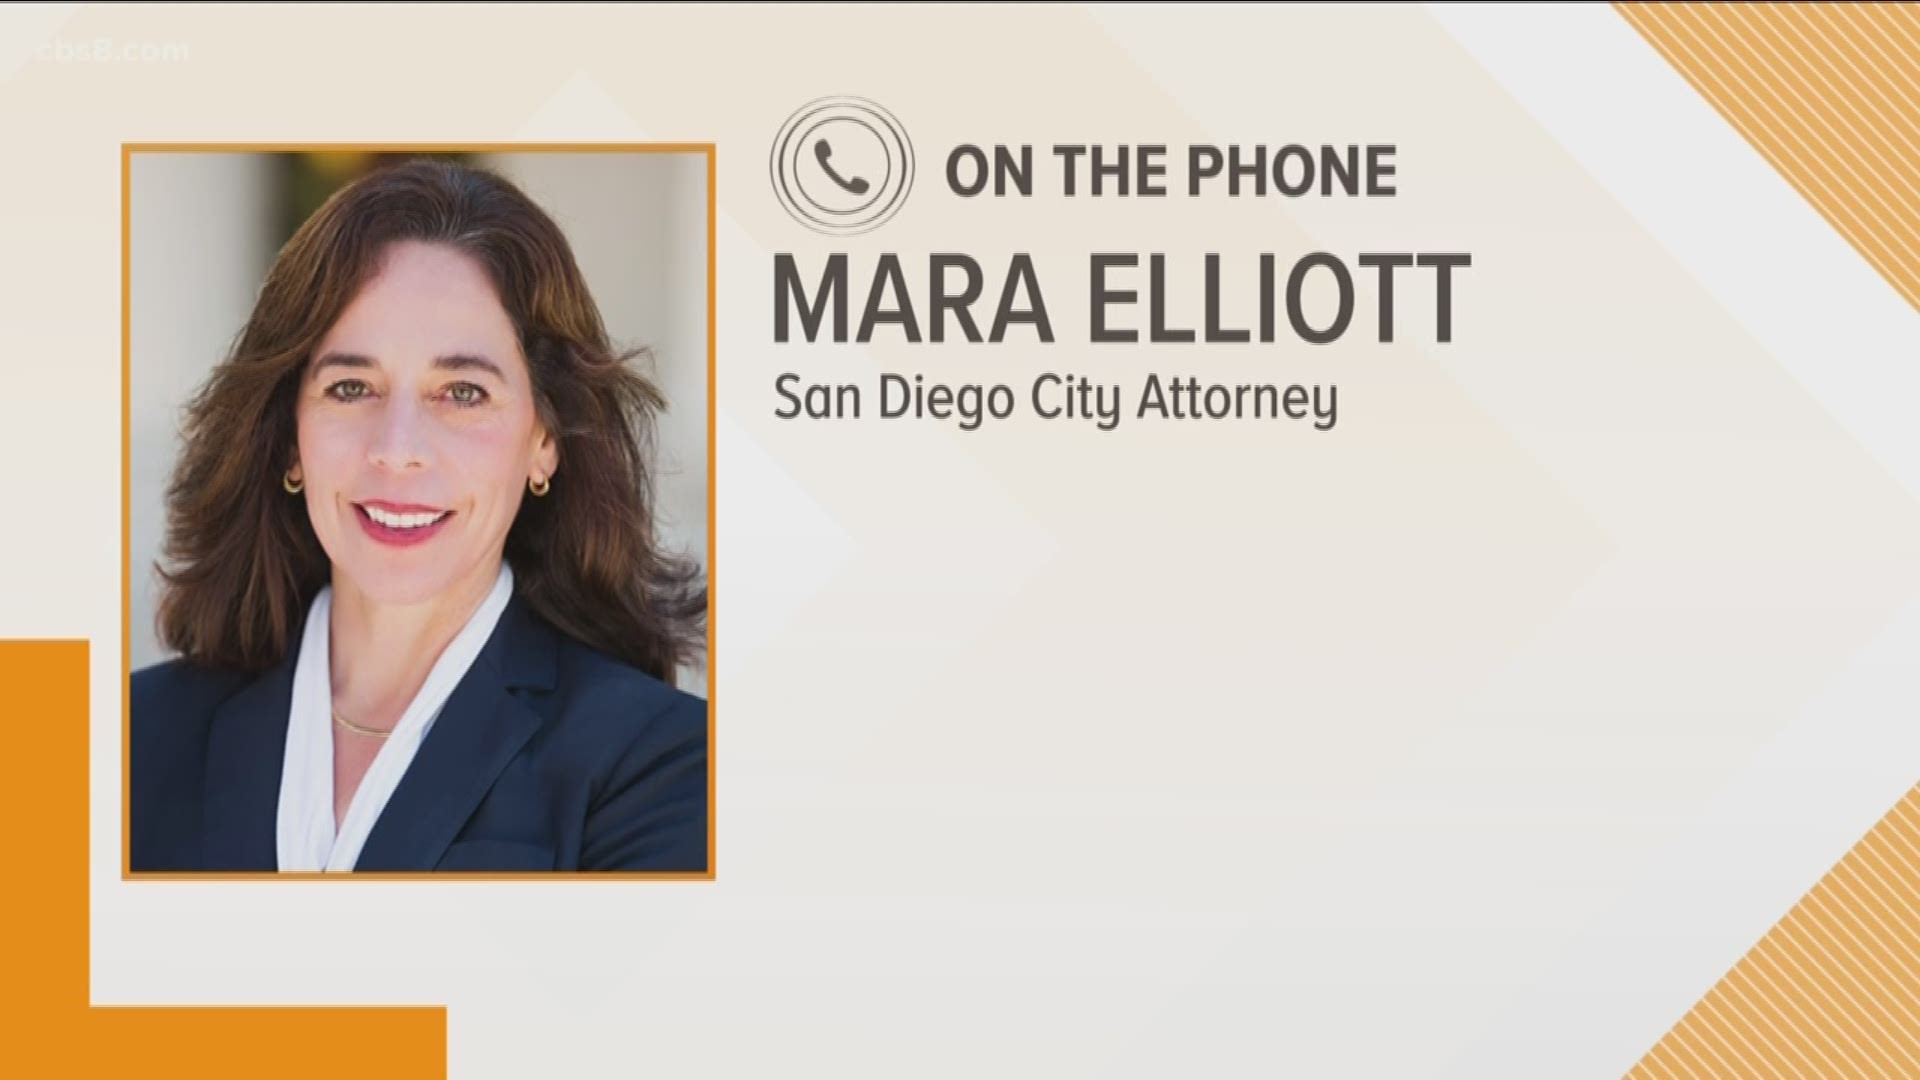 San Diego City Attorney, Mara Elliott, joined Morning Extra to talk about what her office is doing to combat this issue and how consumers can help.